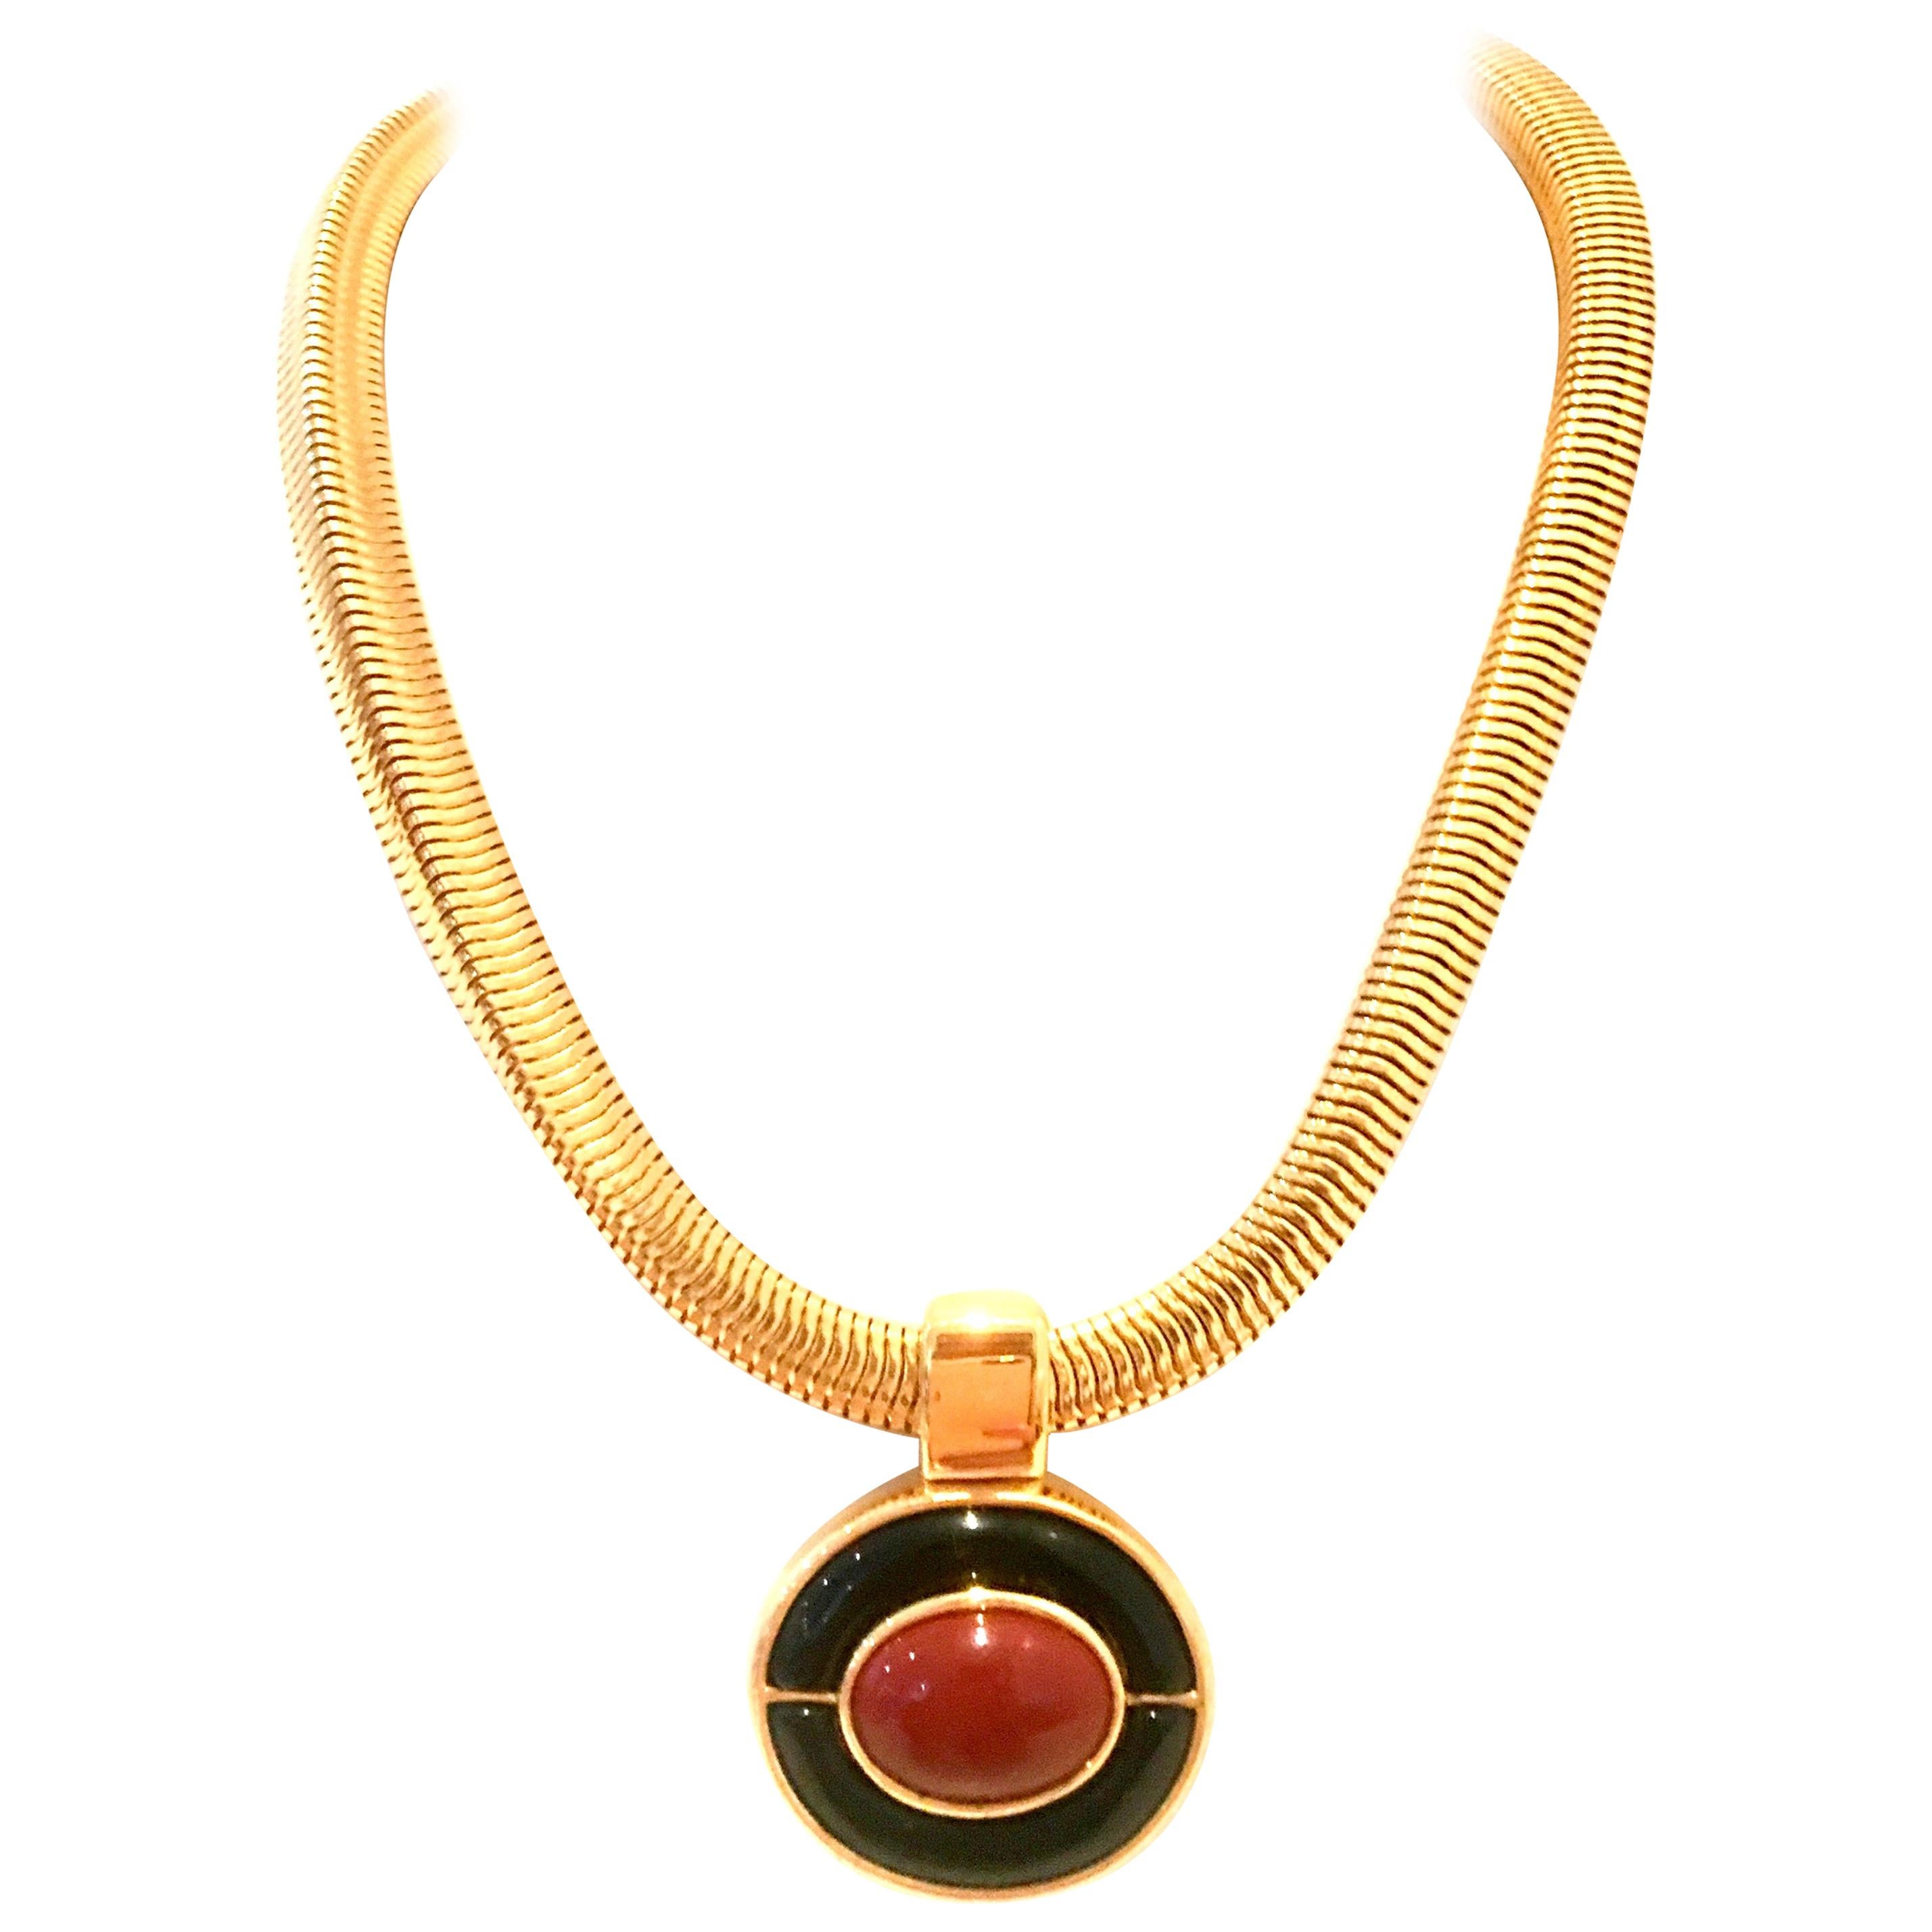 80'S Art Deco Style Gold & Enamel Abstract Pendant Necklace By, Monet